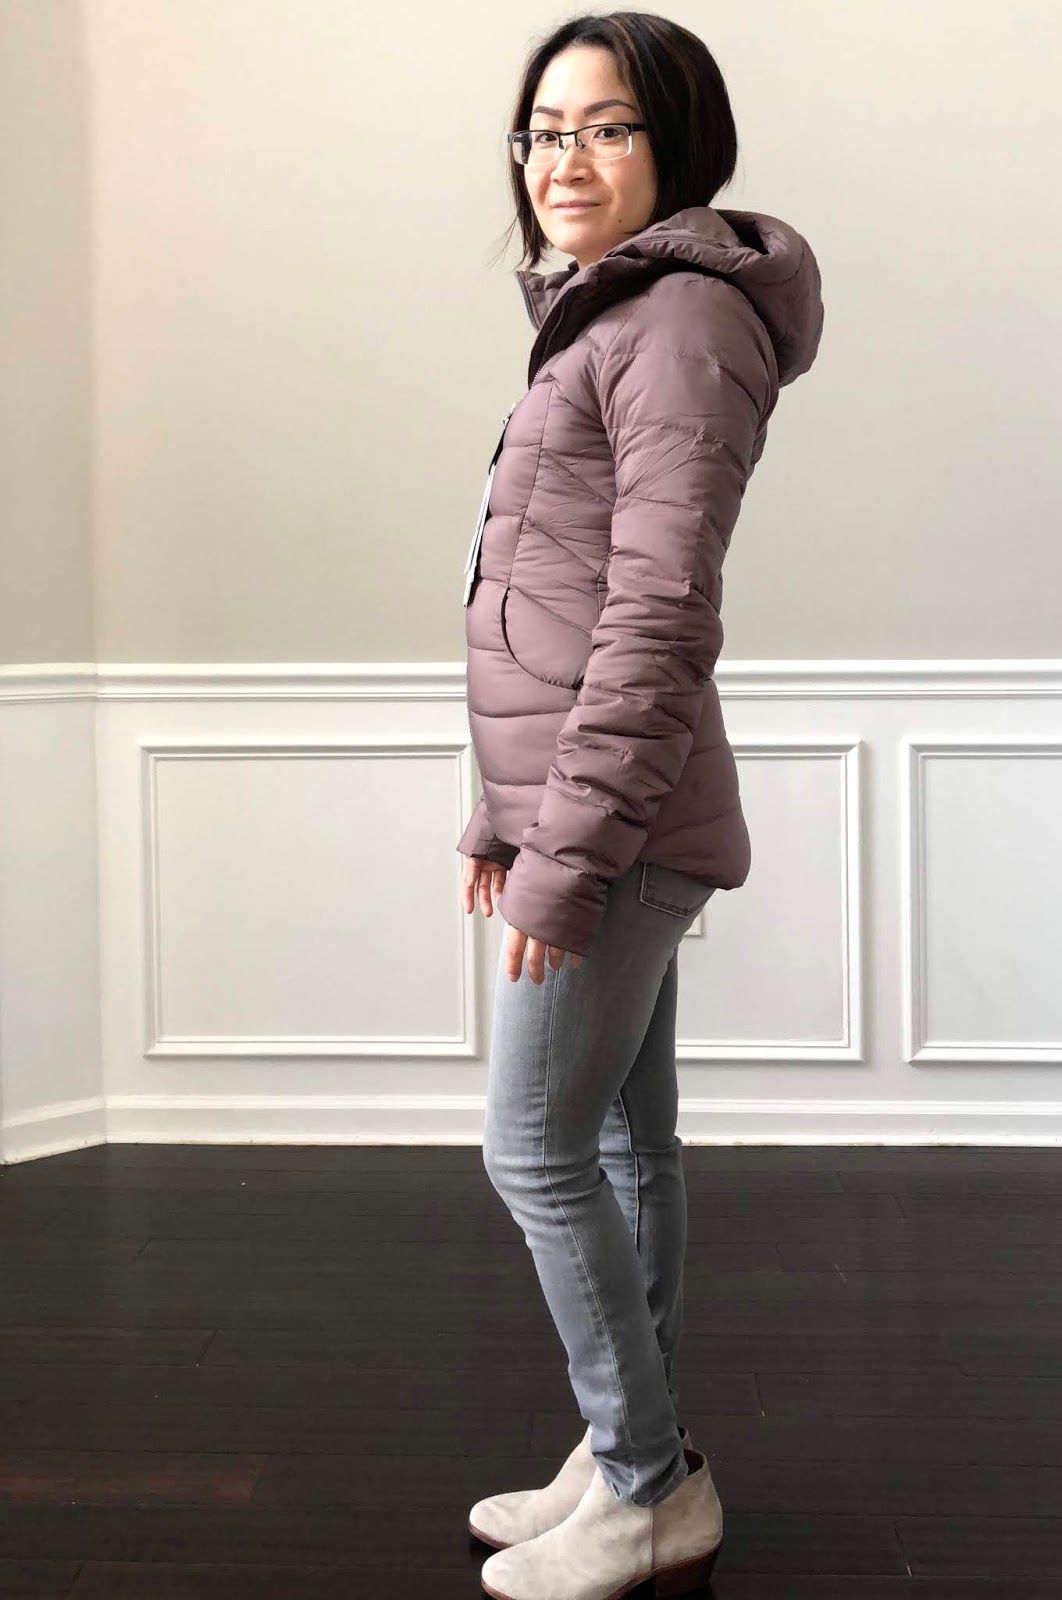 Fit Review Friday! Pack It Down Jacket & Hooded Define Jacket